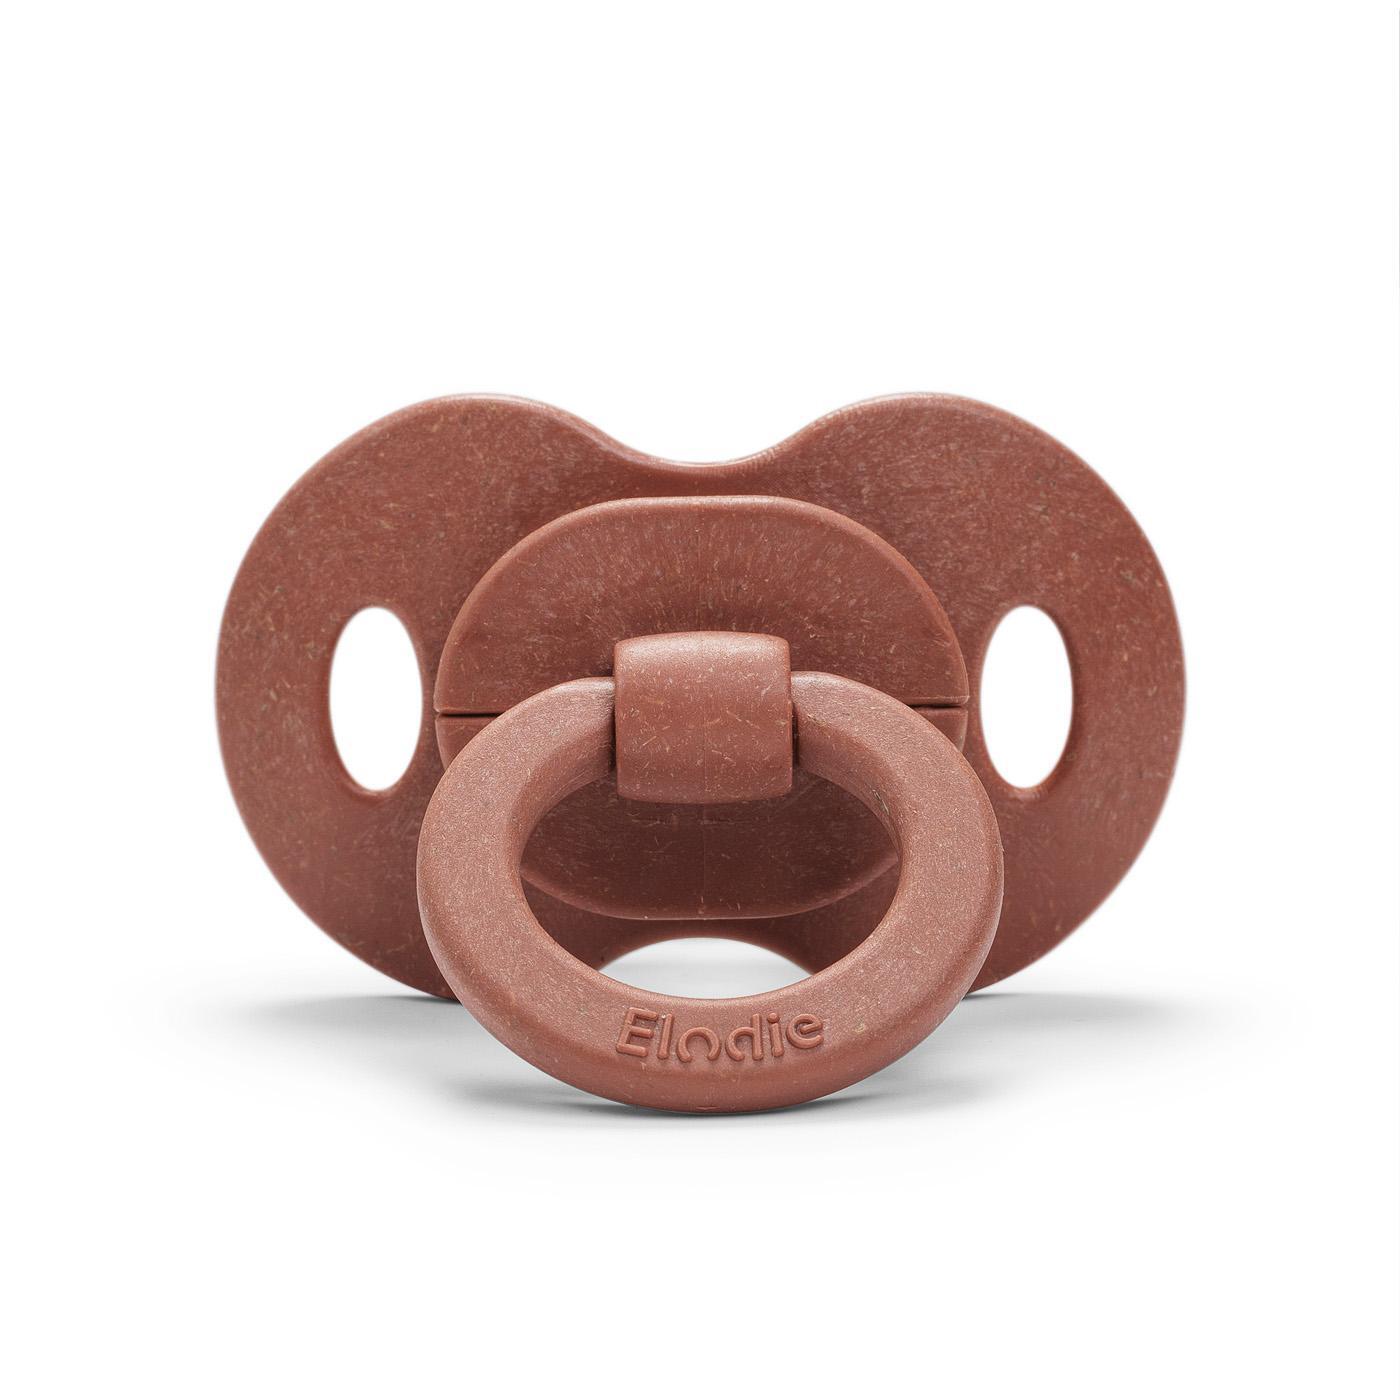 Elodie Details Bamboo Pacifier Natural rubber Burned Clay Burned Clay 3M - Elodie Details